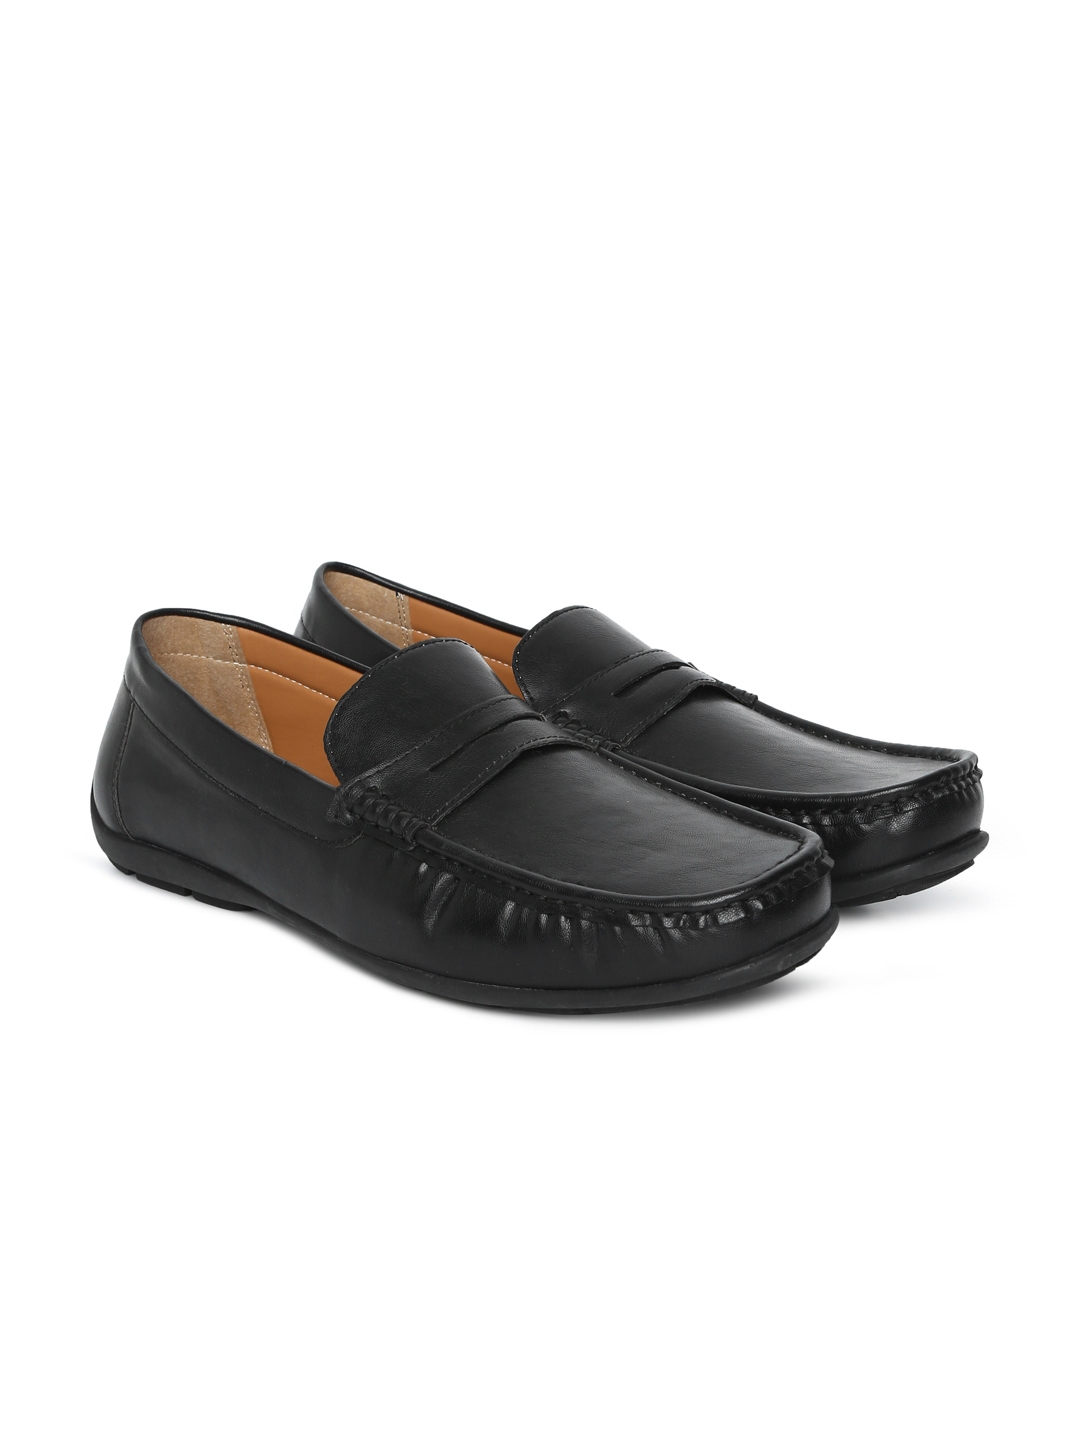 carlton loafers